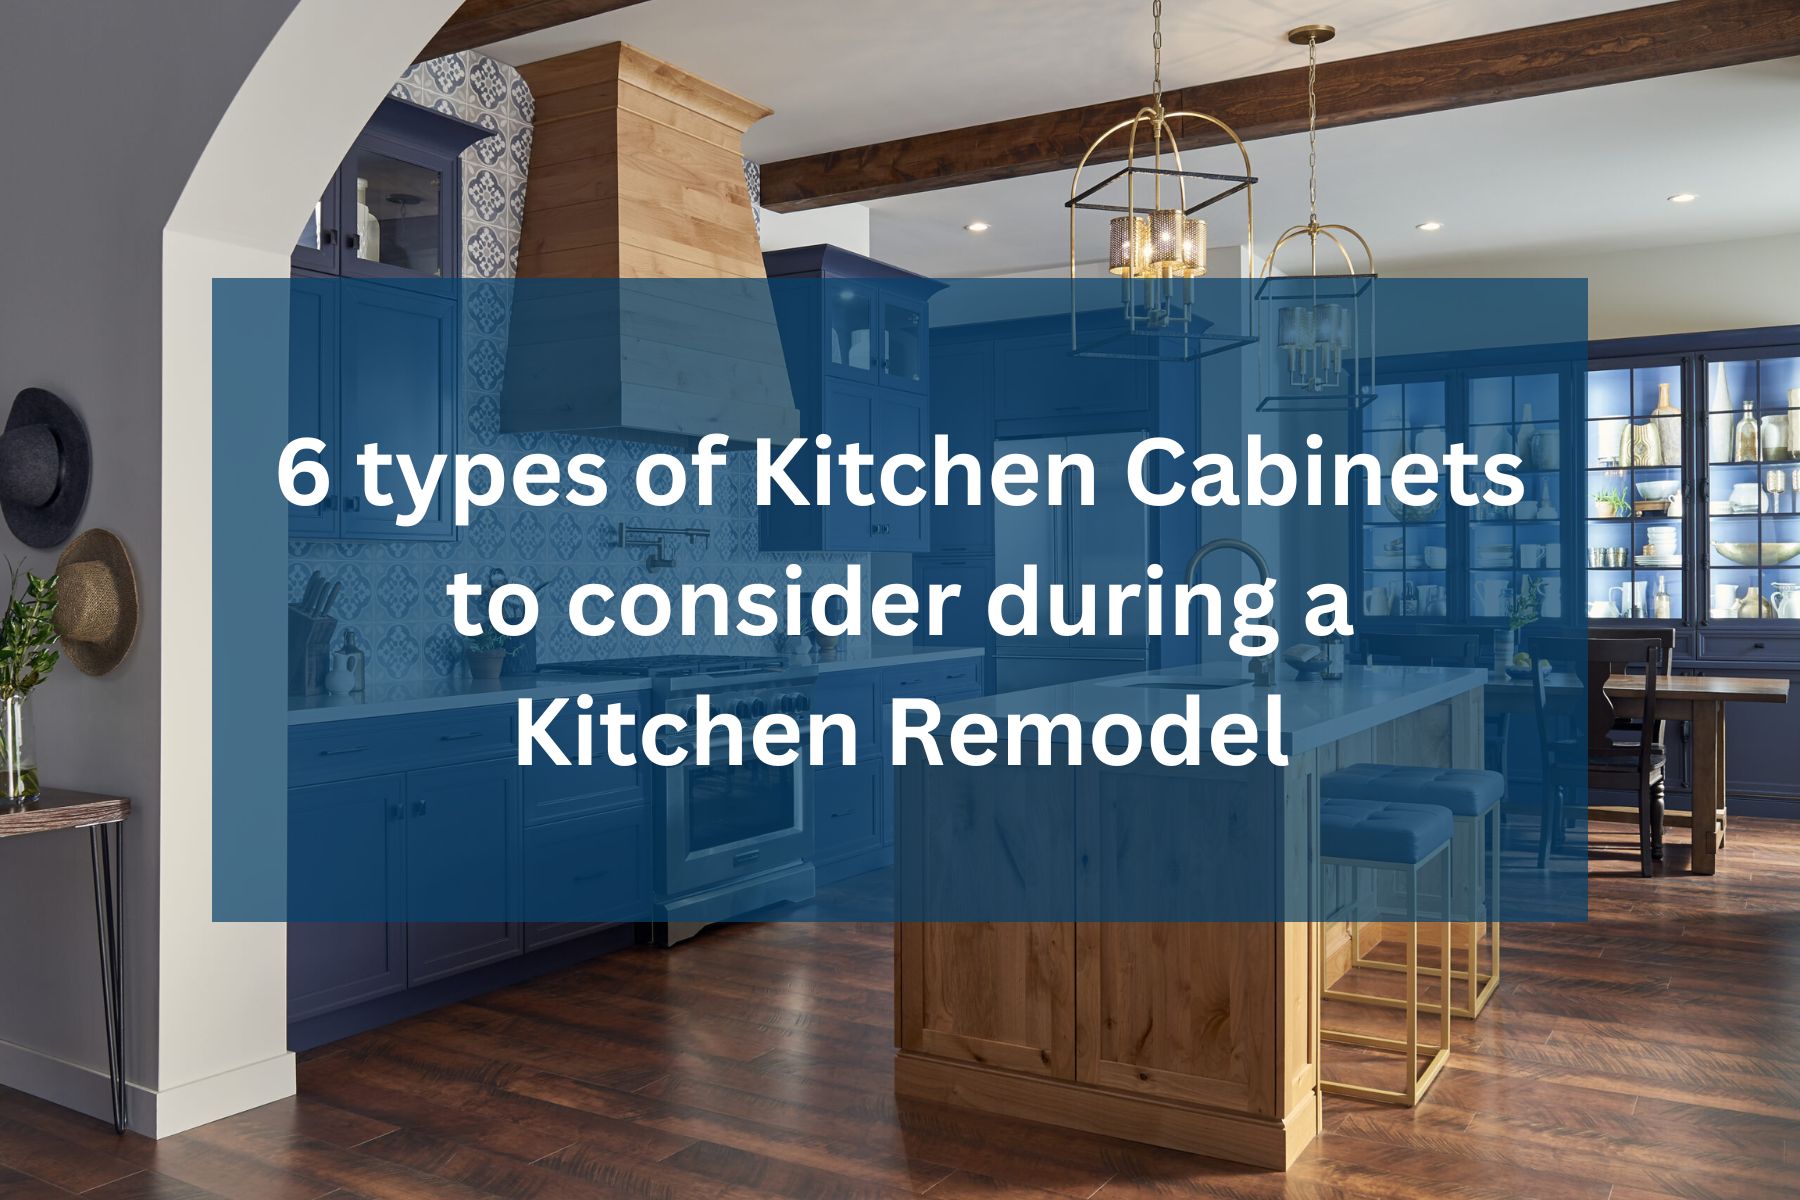 6 types of Kitchen Cabinets to consider during a Kitchen Remodel